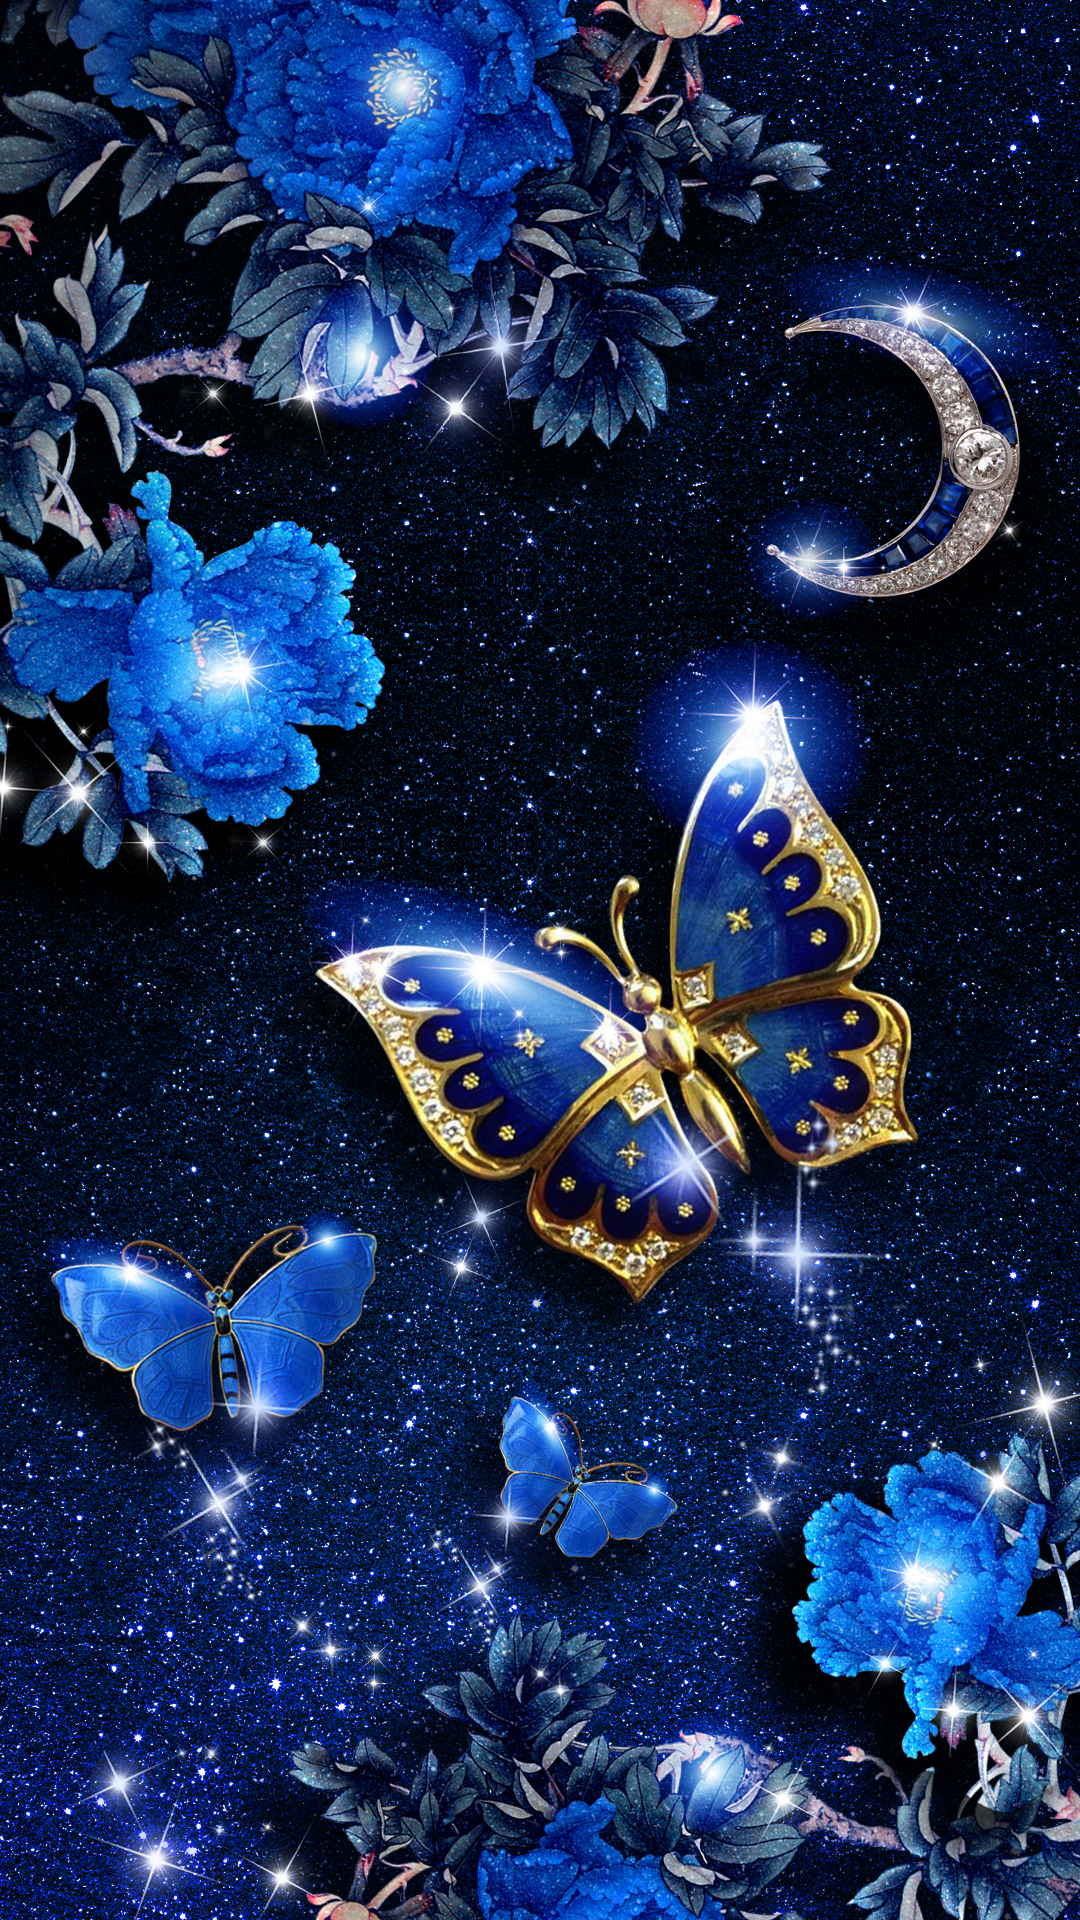 Elegant Blue Butterfly Live Wallpaper! Android Live Wallpaper Background! It Is Originally. Blue Butterfly Wallpaper, Android Wallpaper Blue, Butterfly Wallpaper